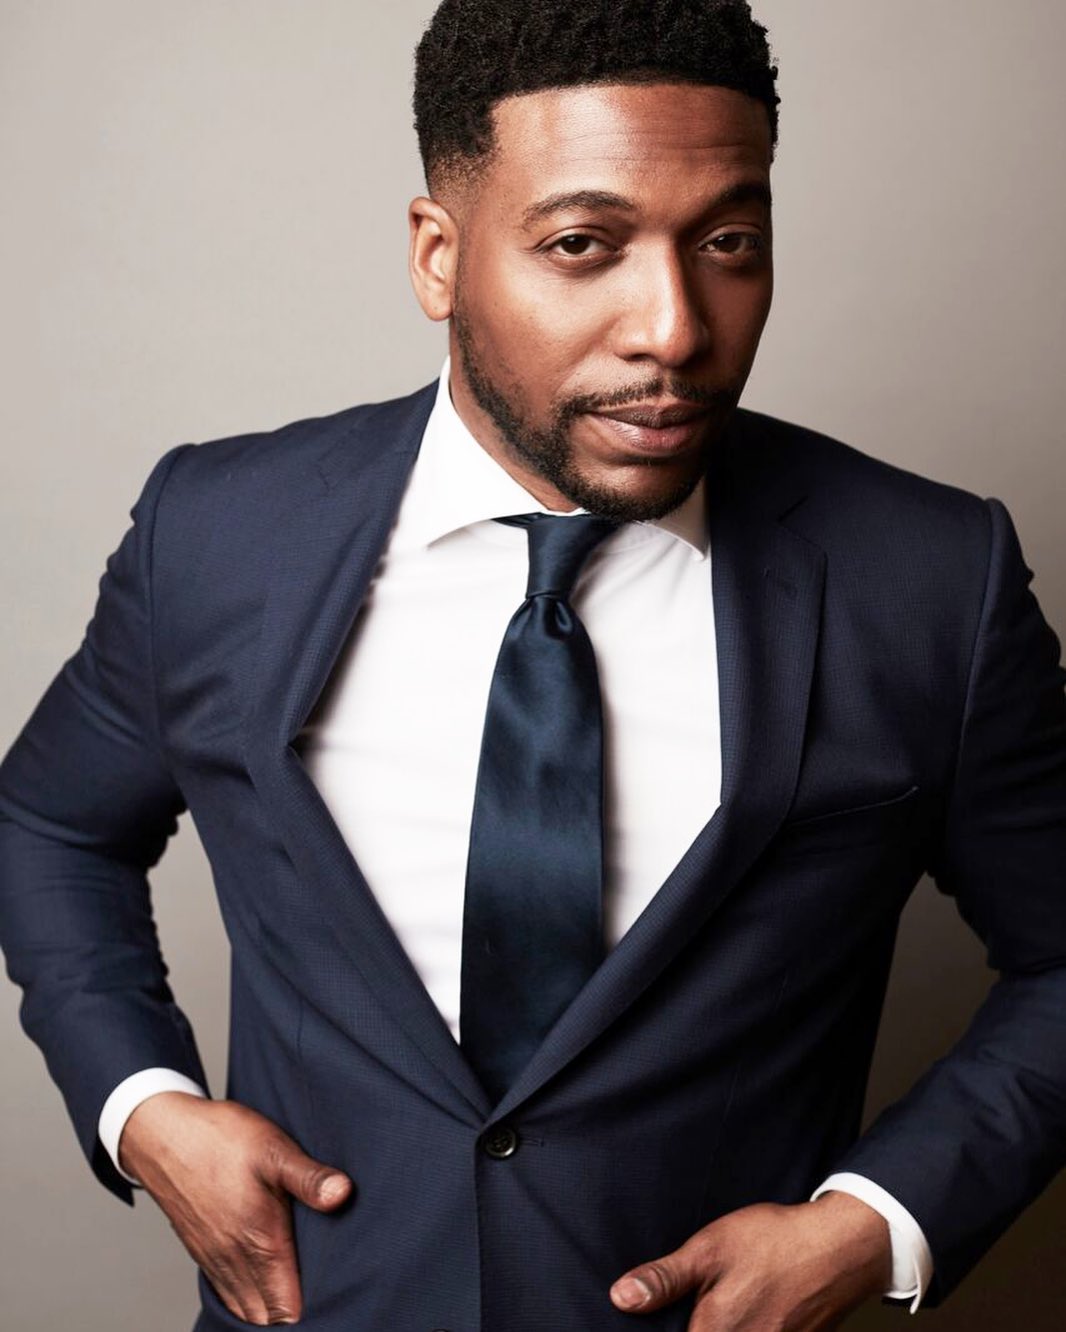 Some Interesting Facts About Jocko Sims' Life and Career